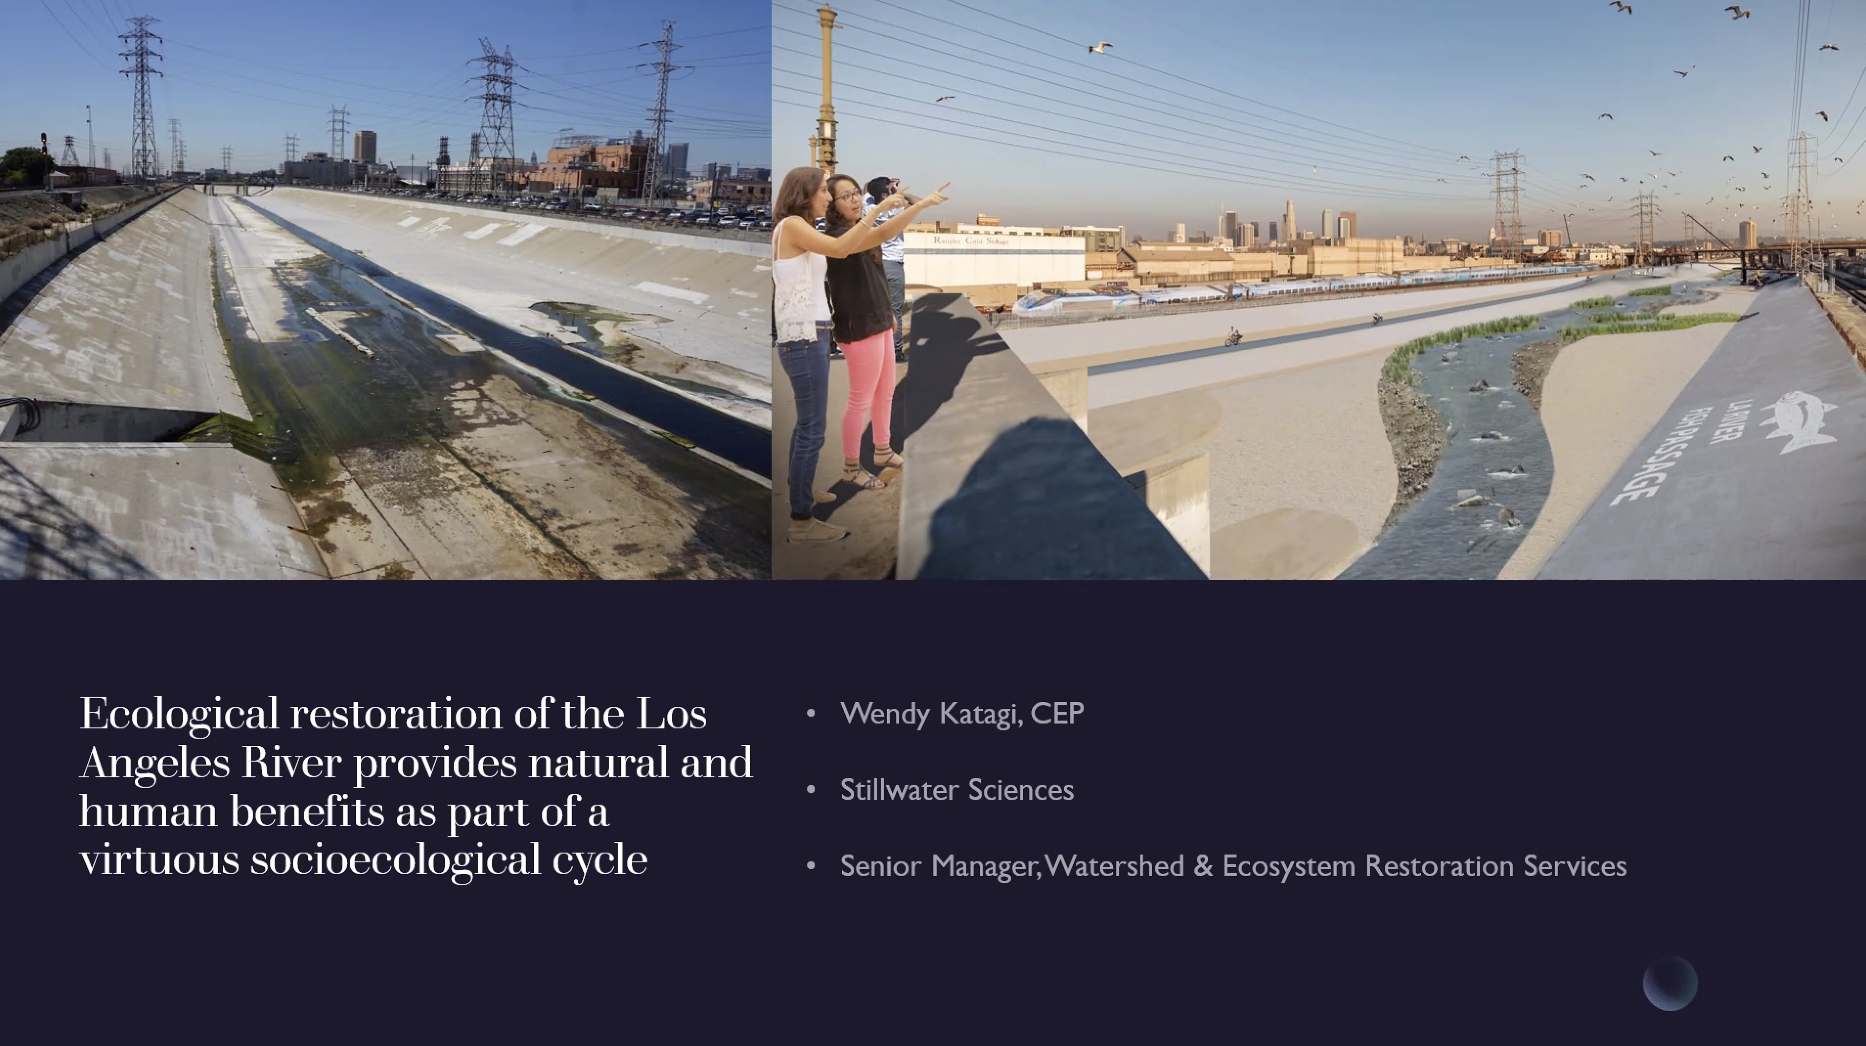 Ecological Restoration of the Los Angeles River Provides Natural and Human Benefits as Part of a Virtuous Socioecological Cycle